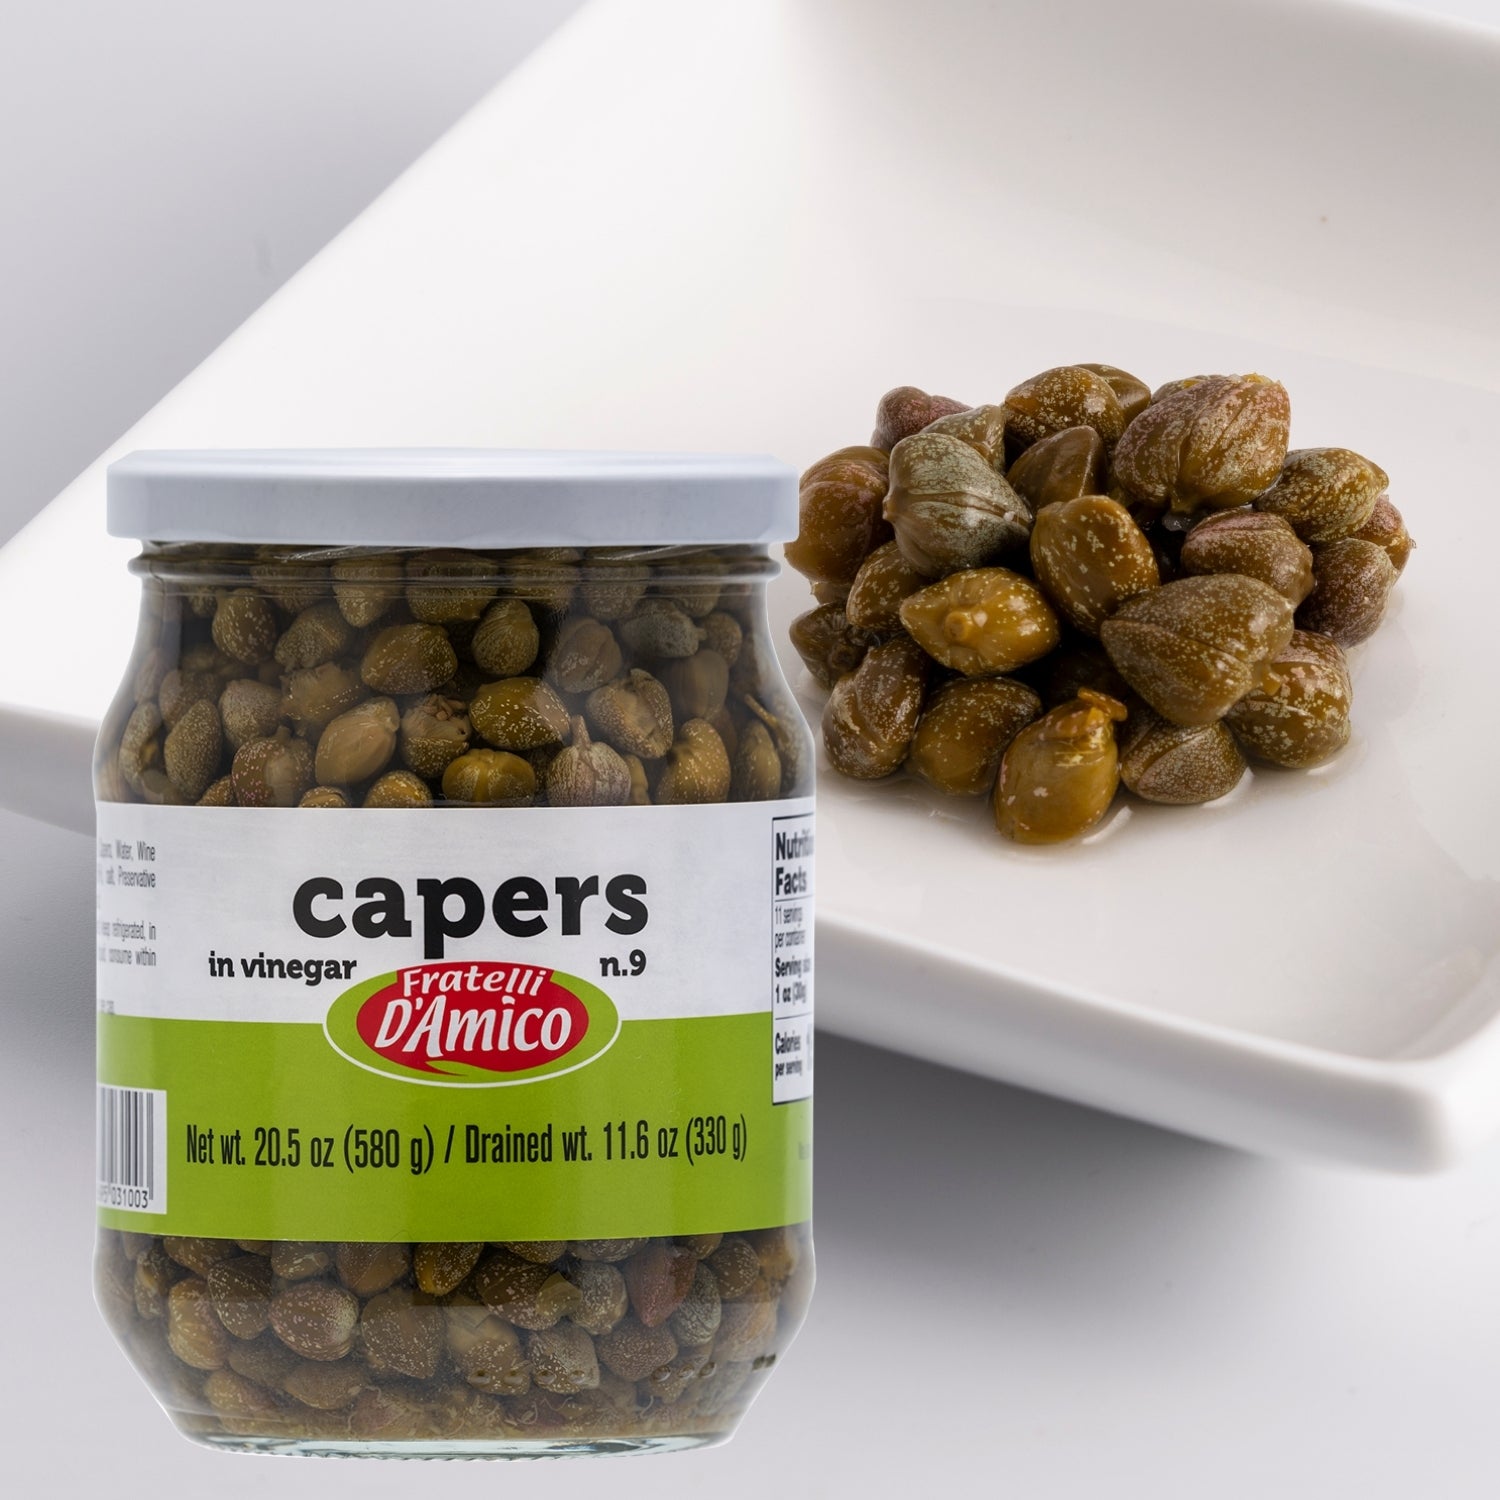 Fratelli D'Amico Capers in Vinegar, Pickles no 9, Net wt. 20.5oz (580g).